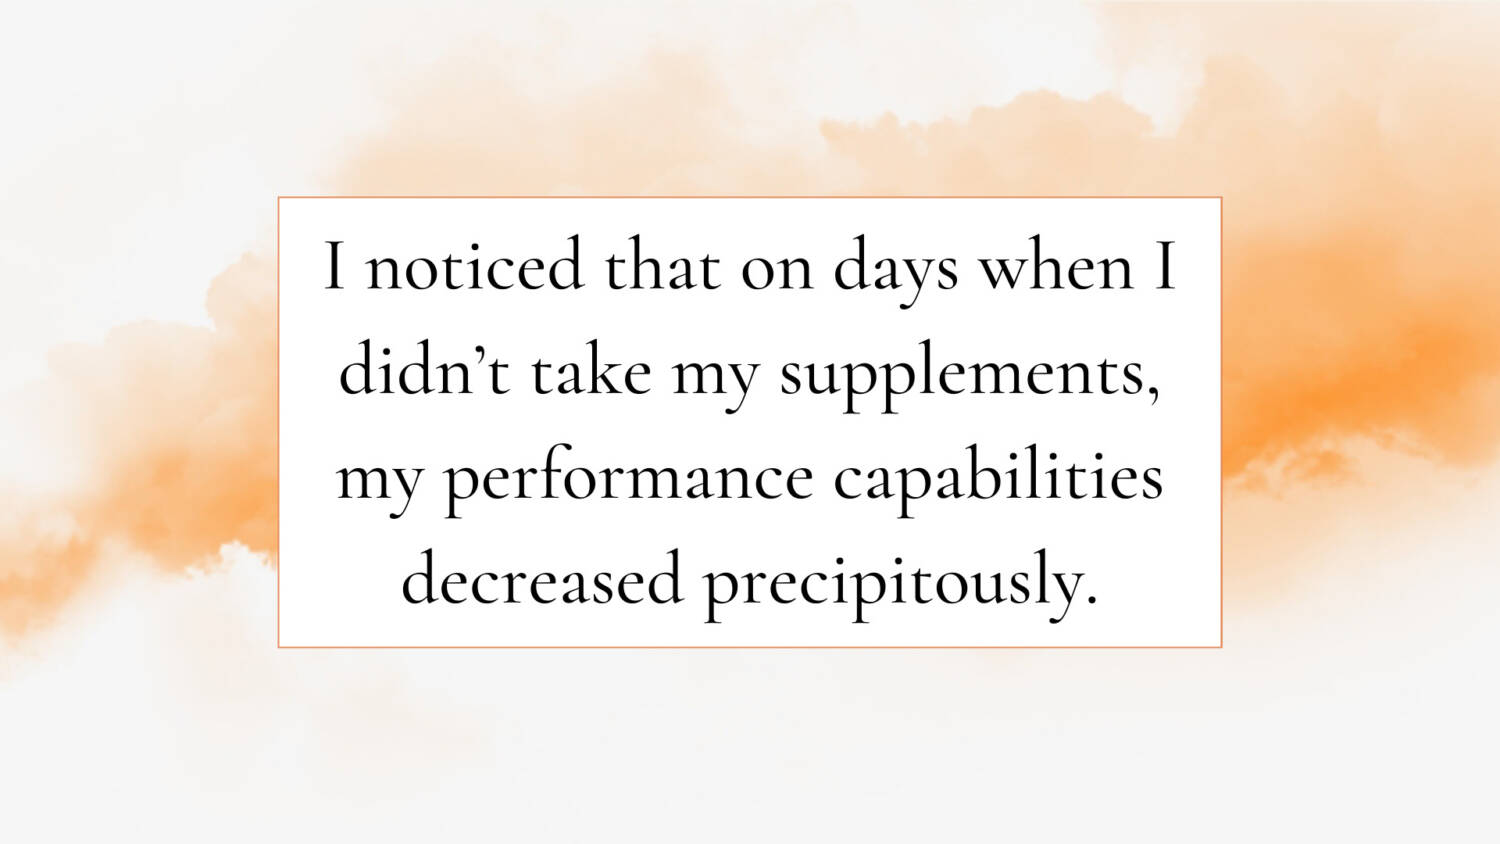 I noticed that on days when I didn’t take my supplements, my performance capabilities decreased precipitously.